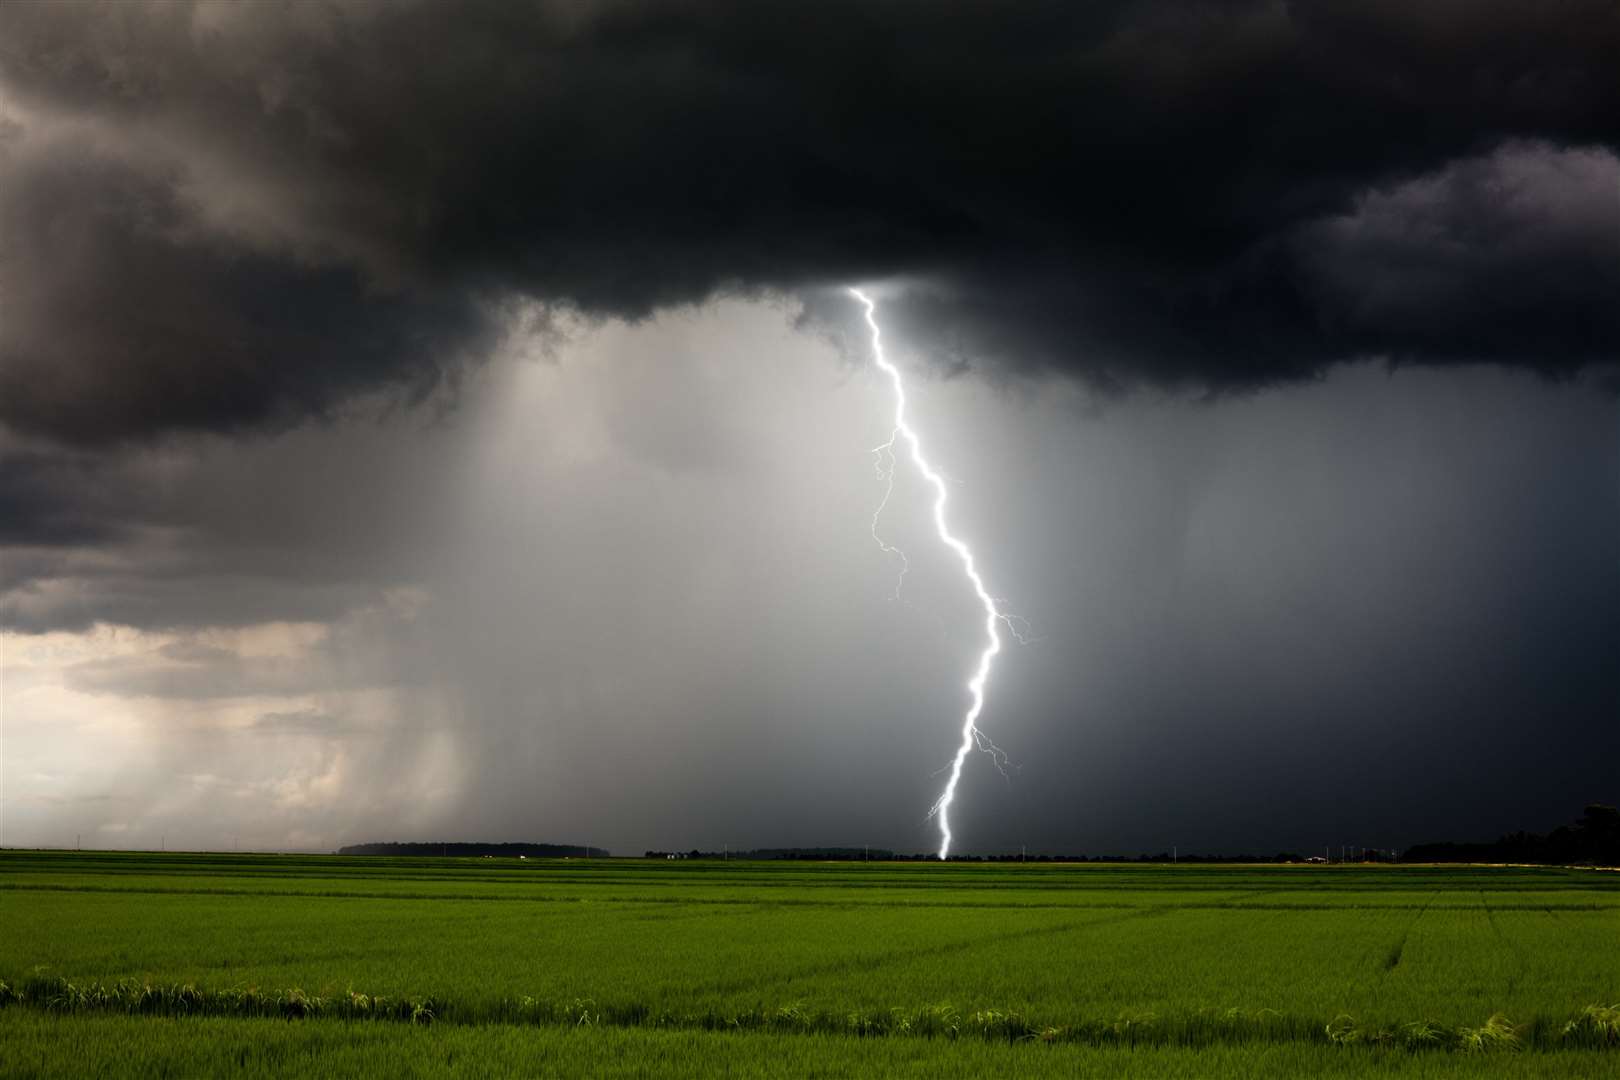 The Met Office is forecasting thunderstorms for next week